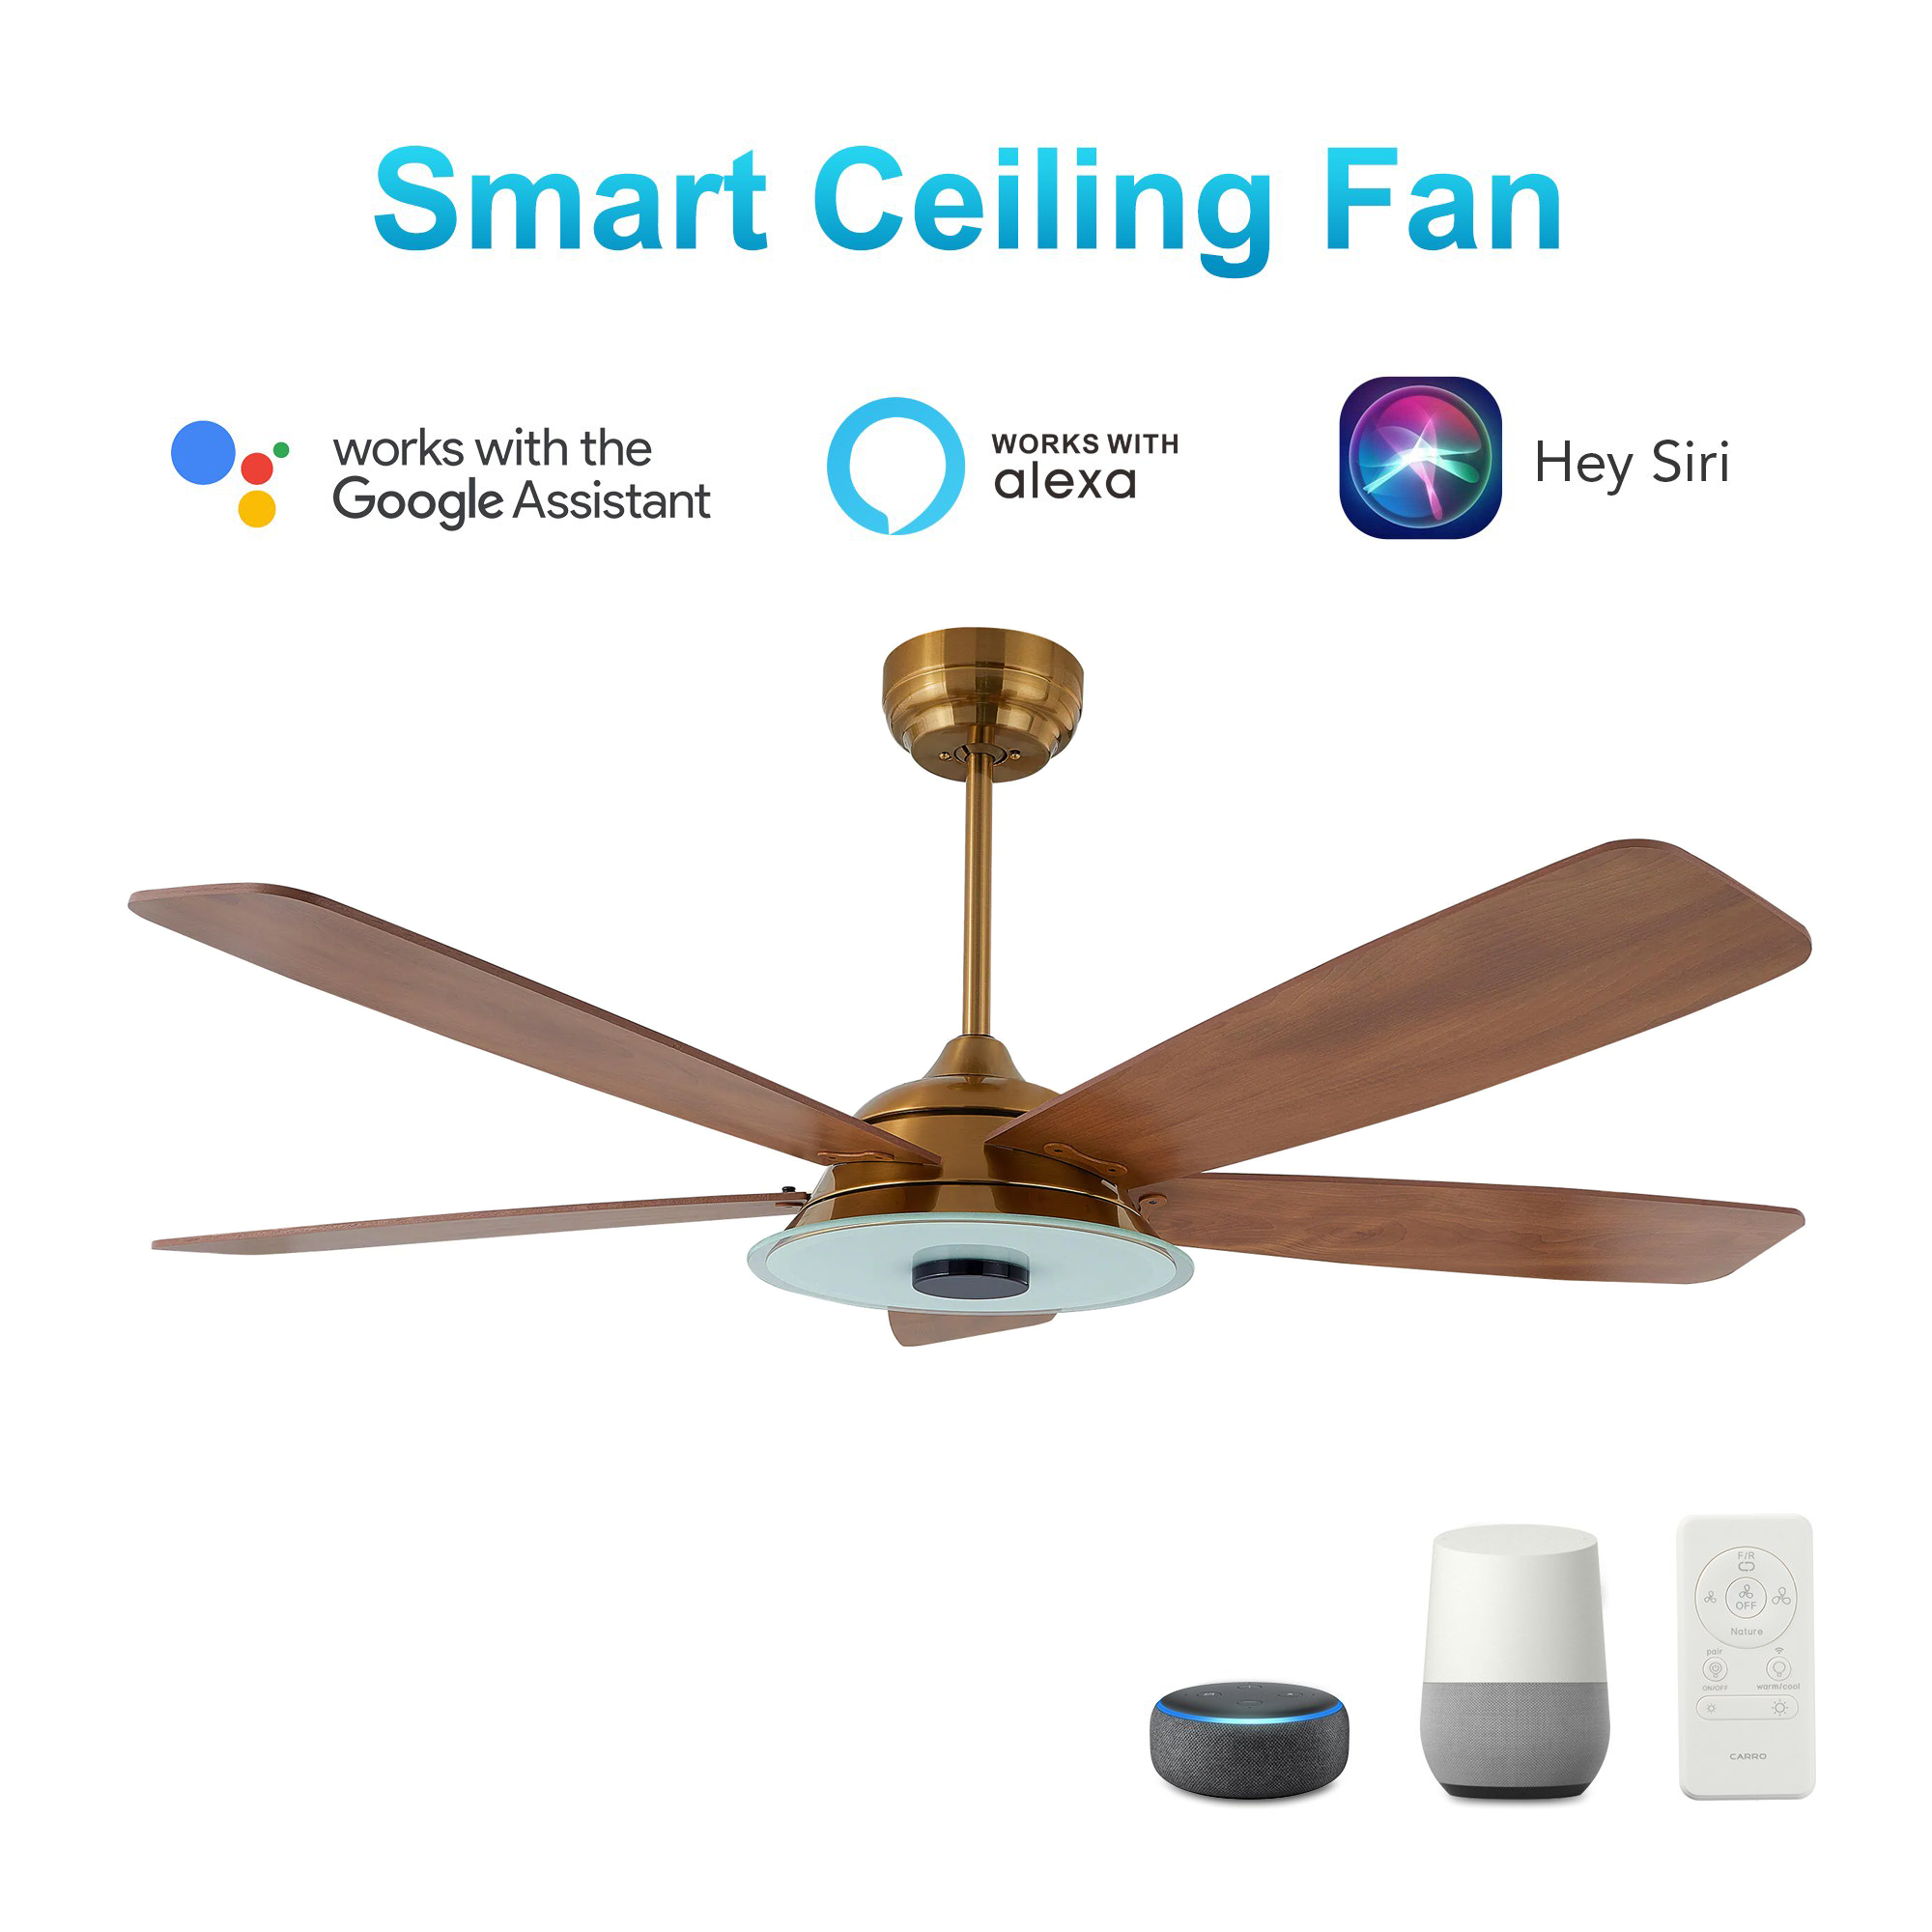 Striker Gold/Wood 5 Blade Smart Ceiling Fan with Dimmable LED Light Kit Works with Remote Control, Wi-Fi apps and Voice control via Google Assistant/Alexa/Siri